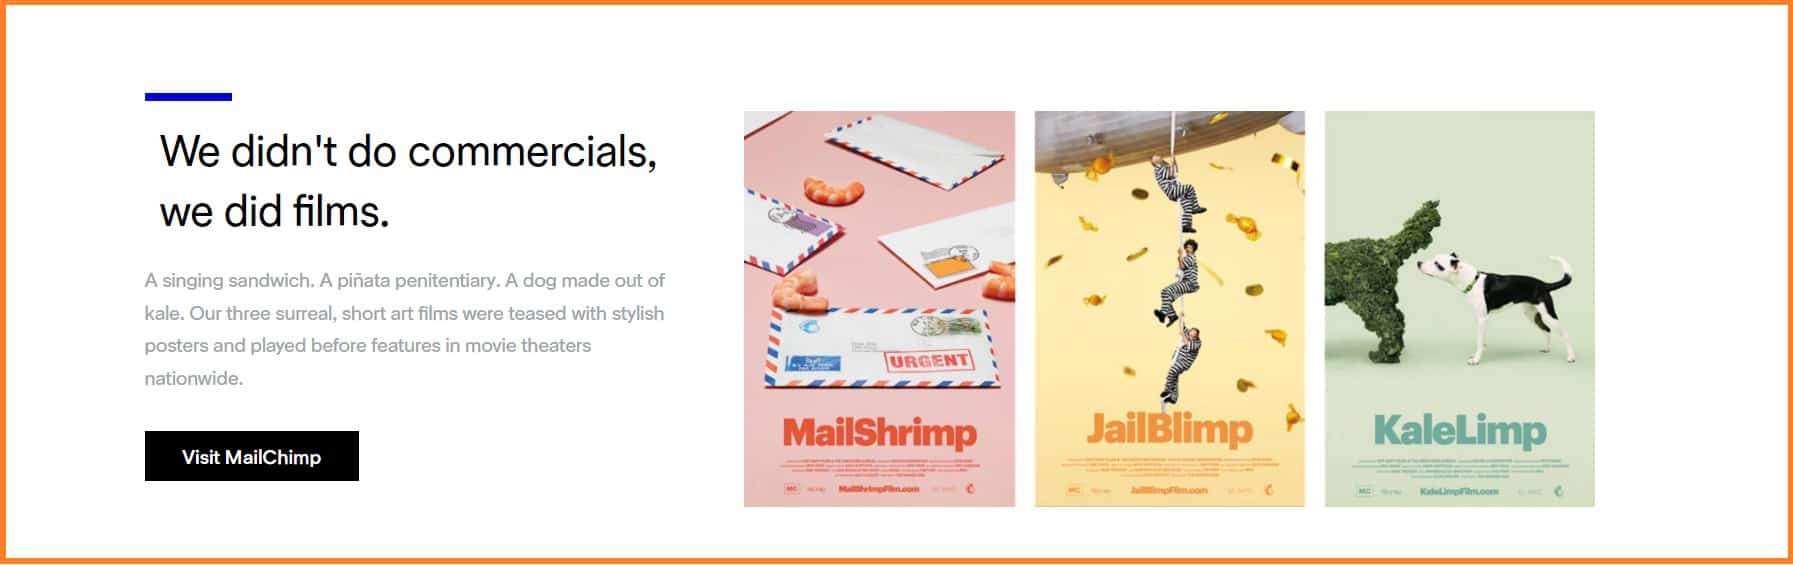 Did you mean Mailchimp ad campaign